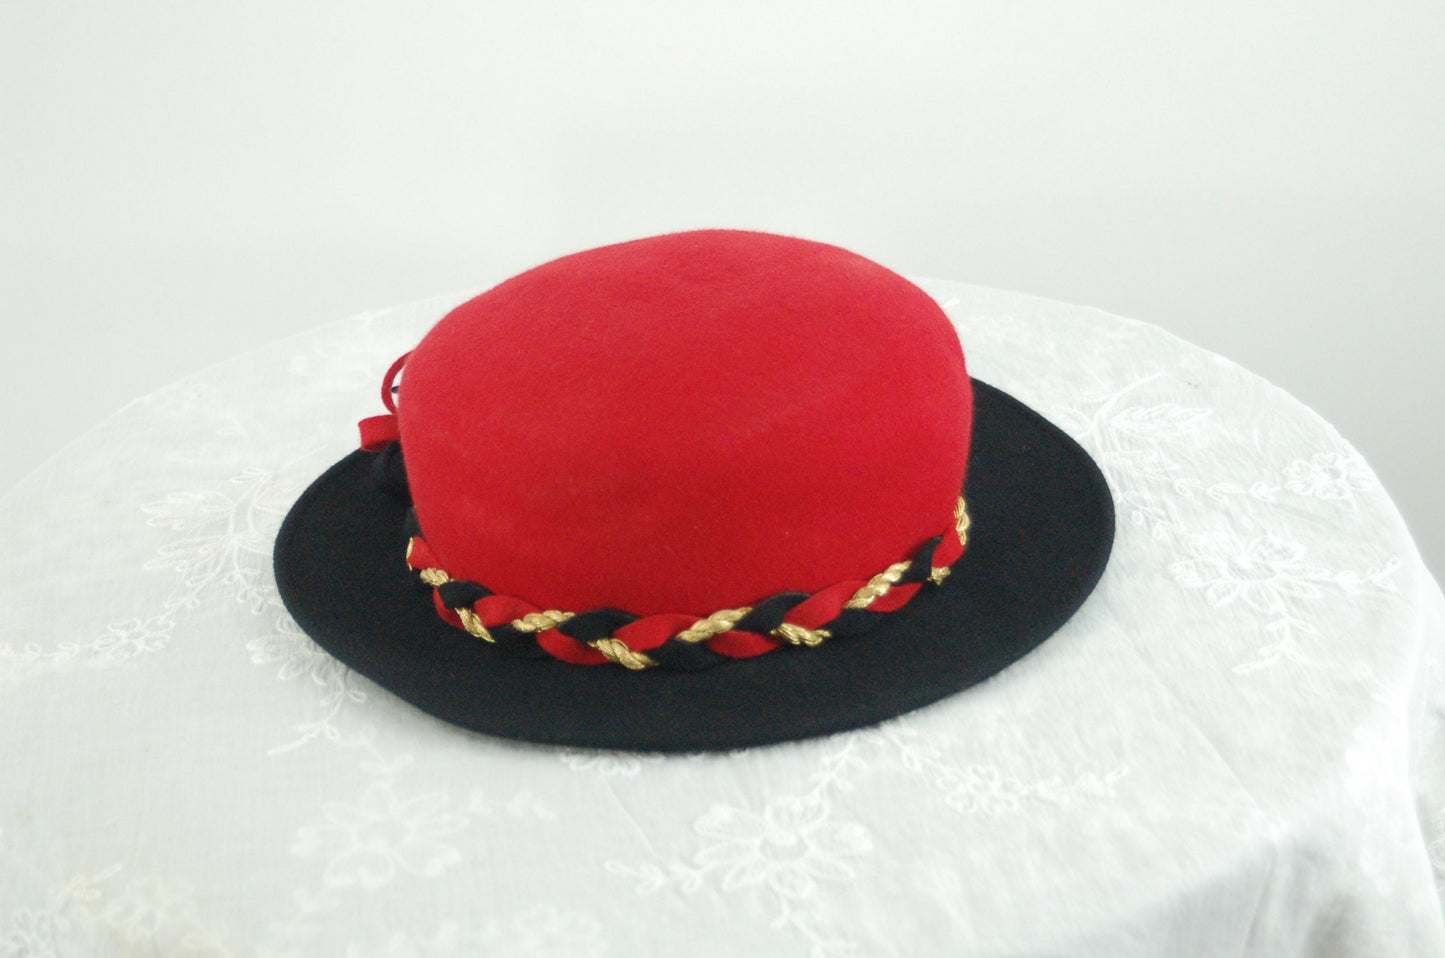 Red and black wool felt vintage hat with gold metallic braided band Made in USA by FM Hat